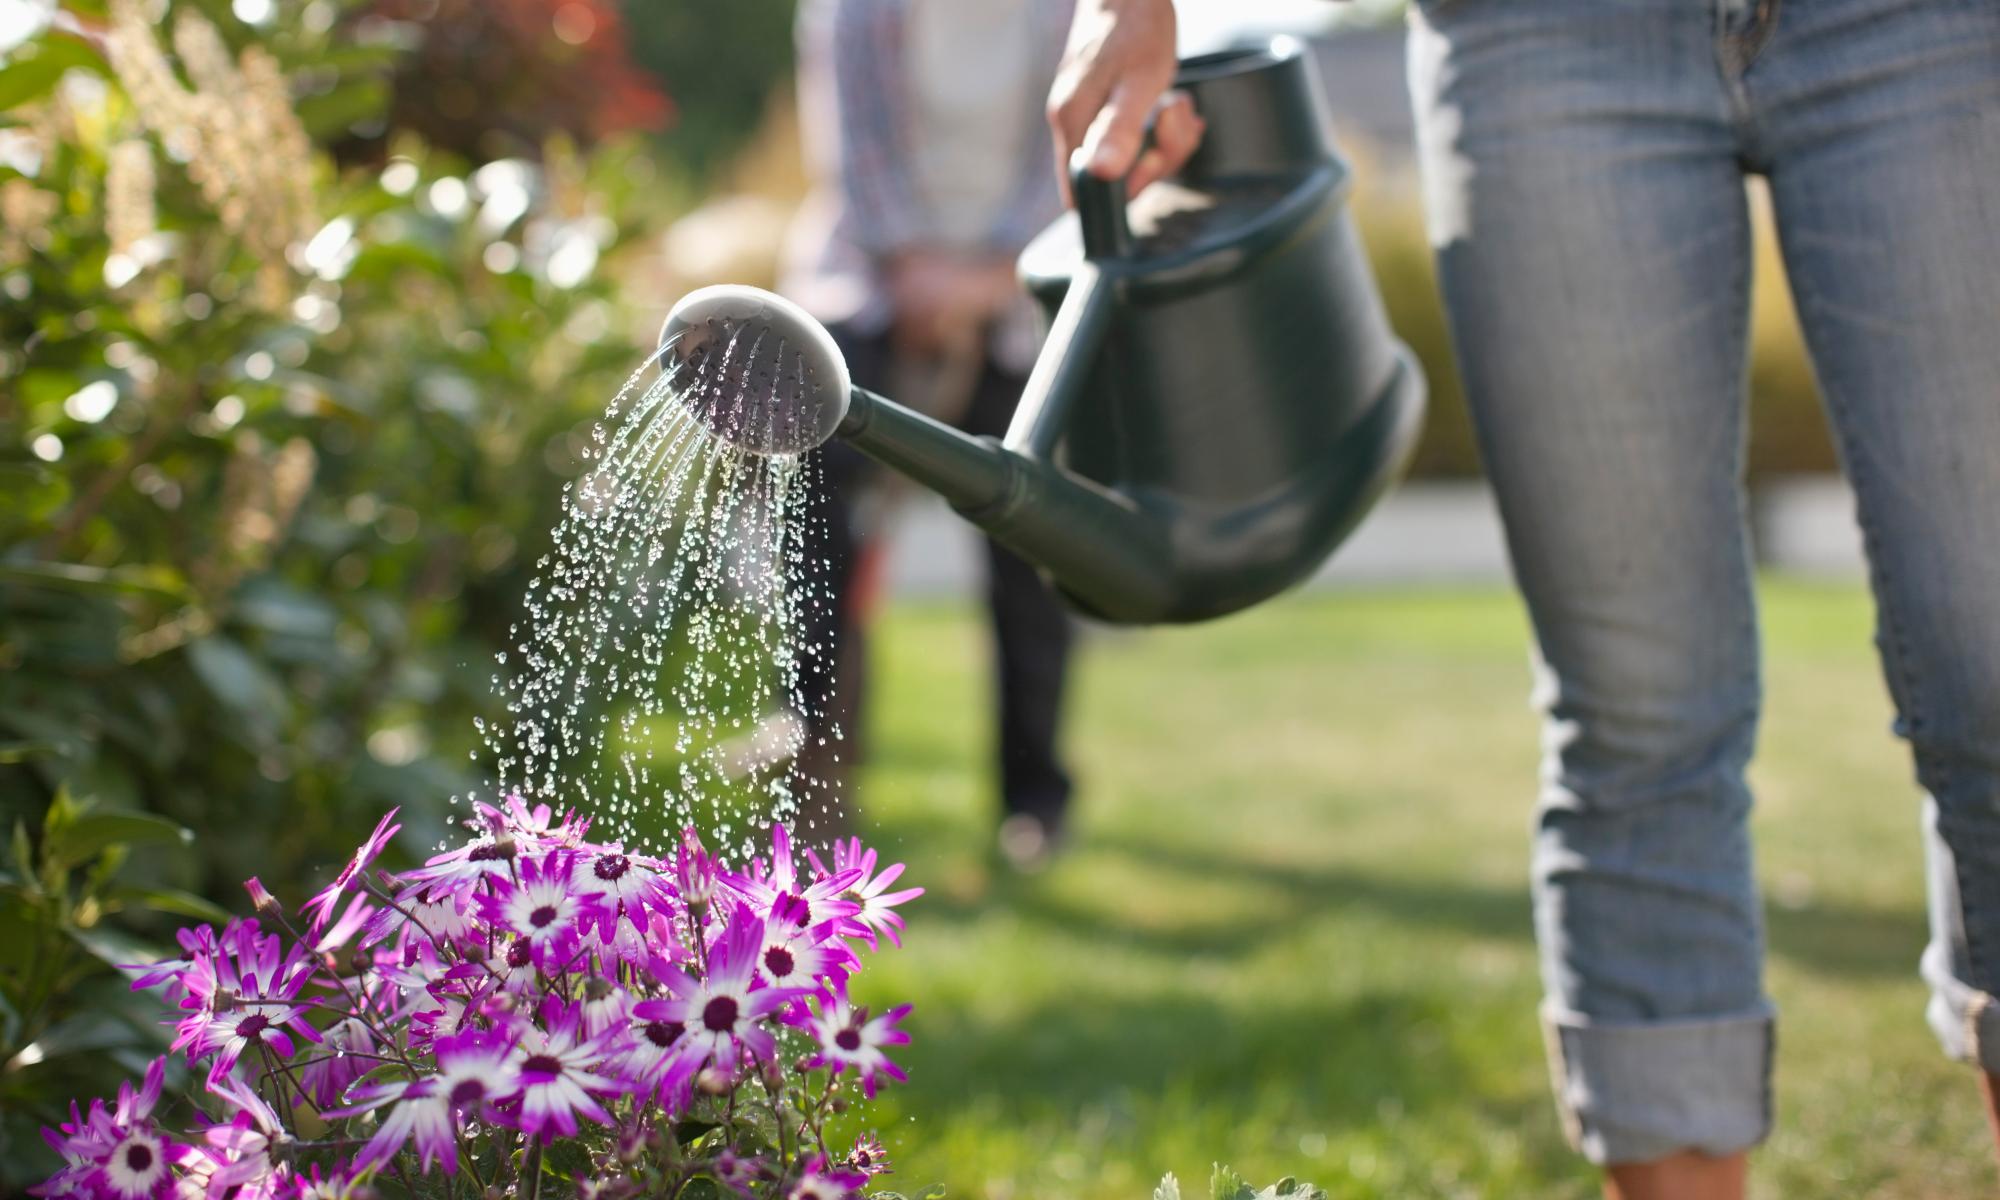 Flushing the loo to gardening: how to save water around the home